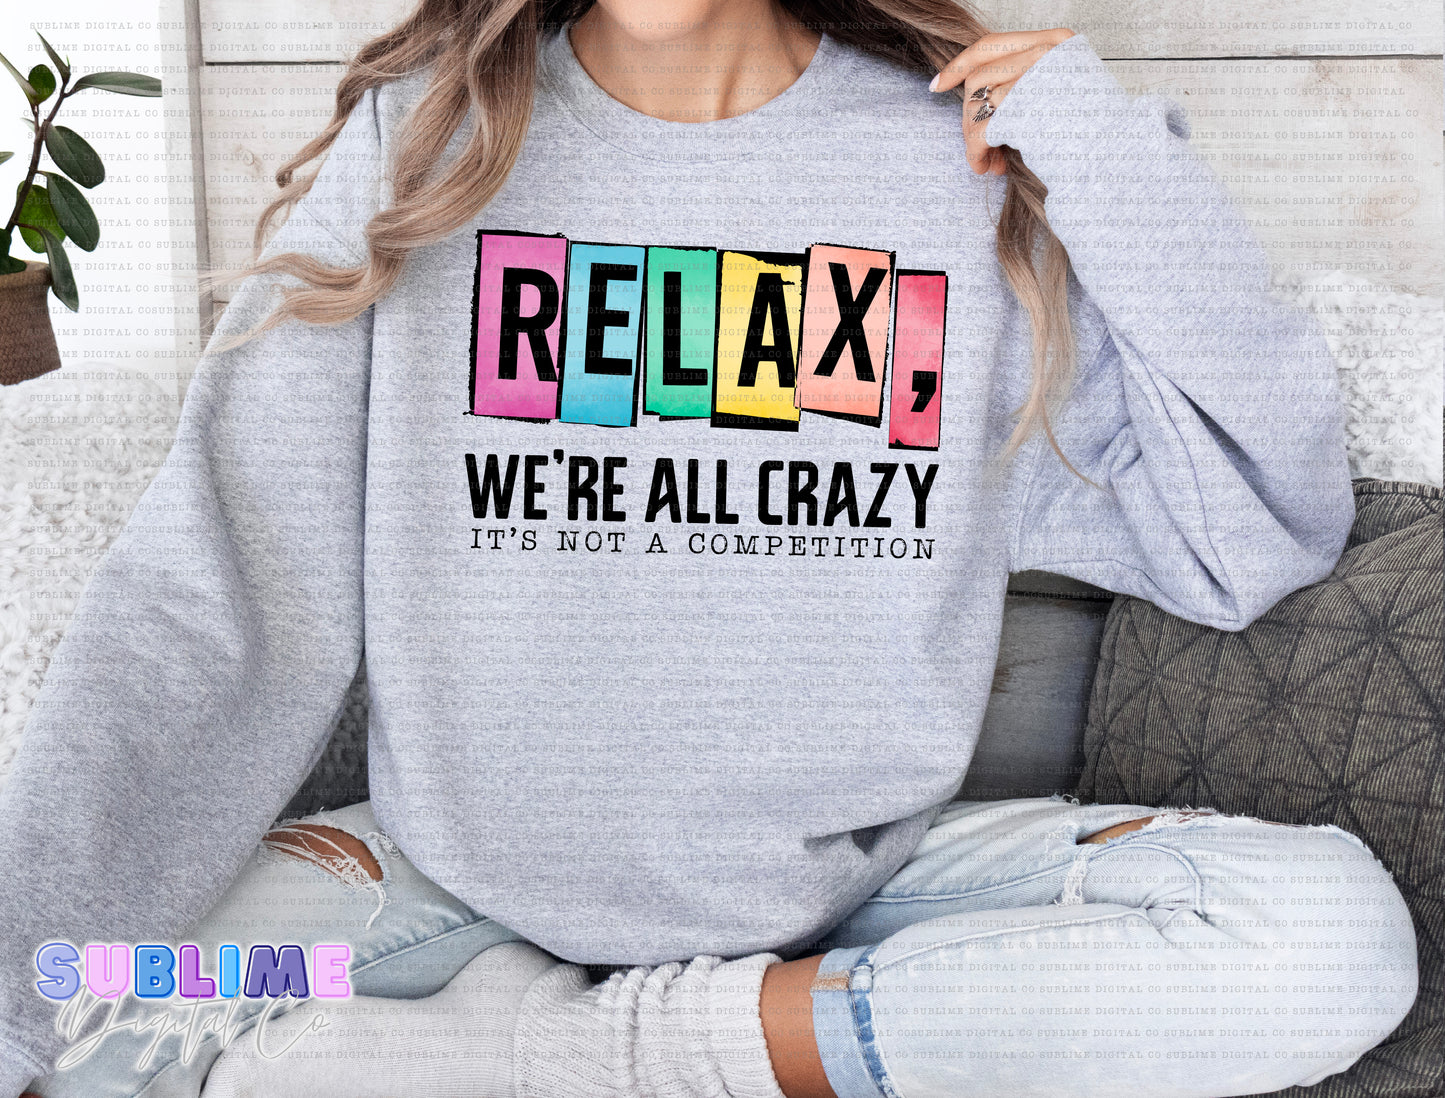 Relax, We're All Crazy • Adult Apparel • Made to Order • TAT: Up To 21 Days